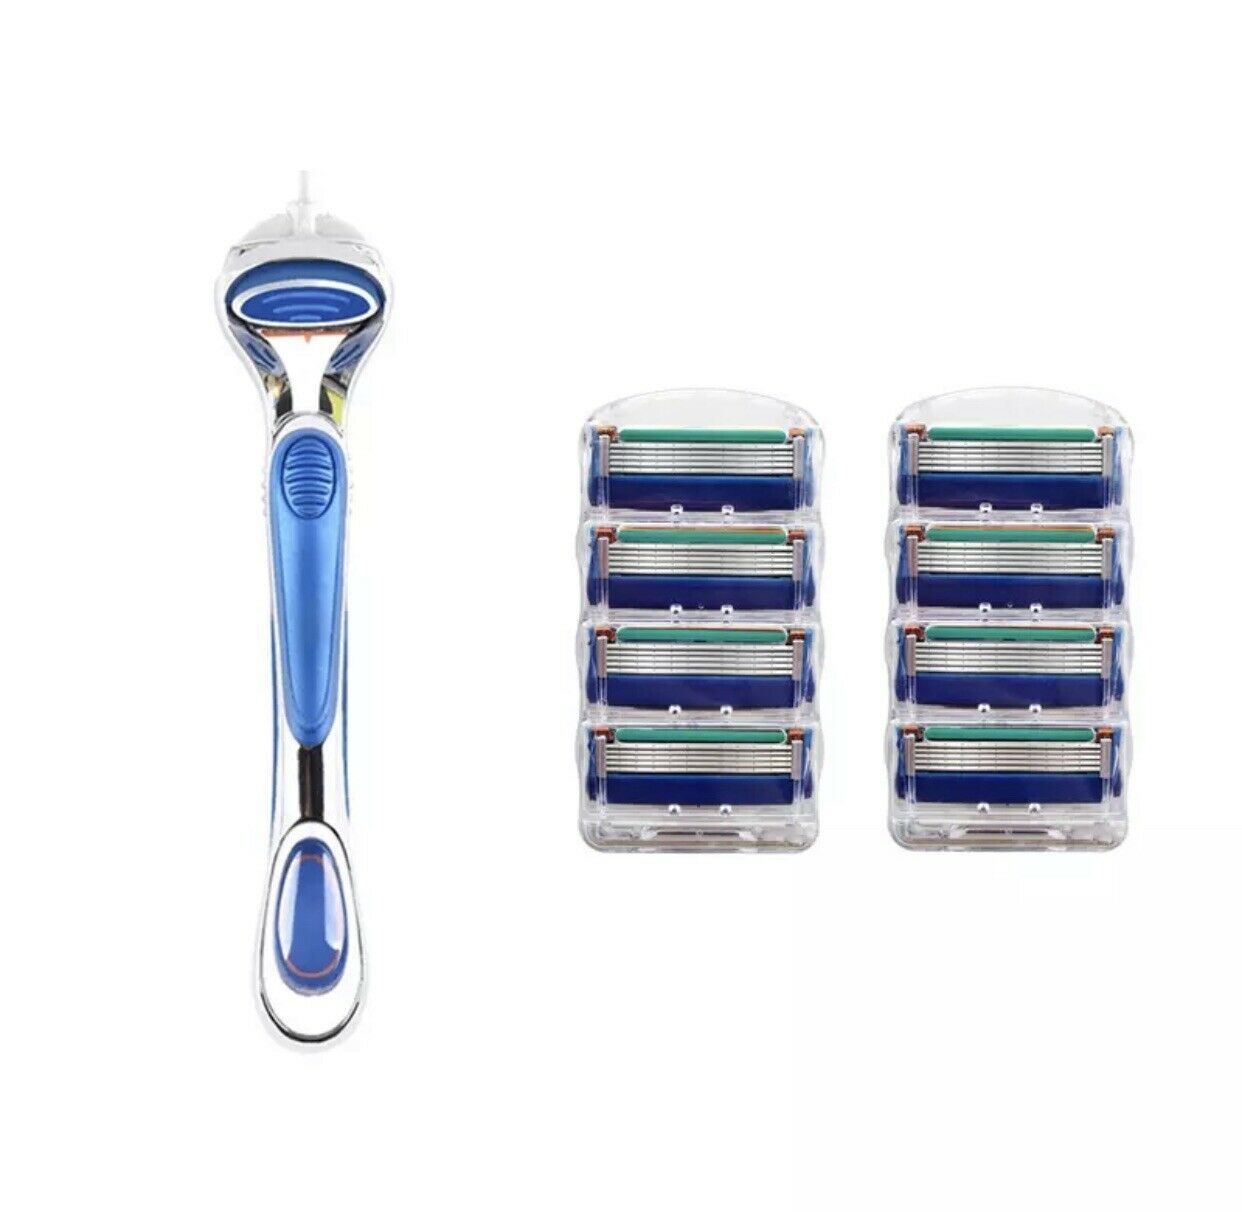 Unbranded - Fusion5 shaving razor blade replacement kit with handle and 8 refill cartridges